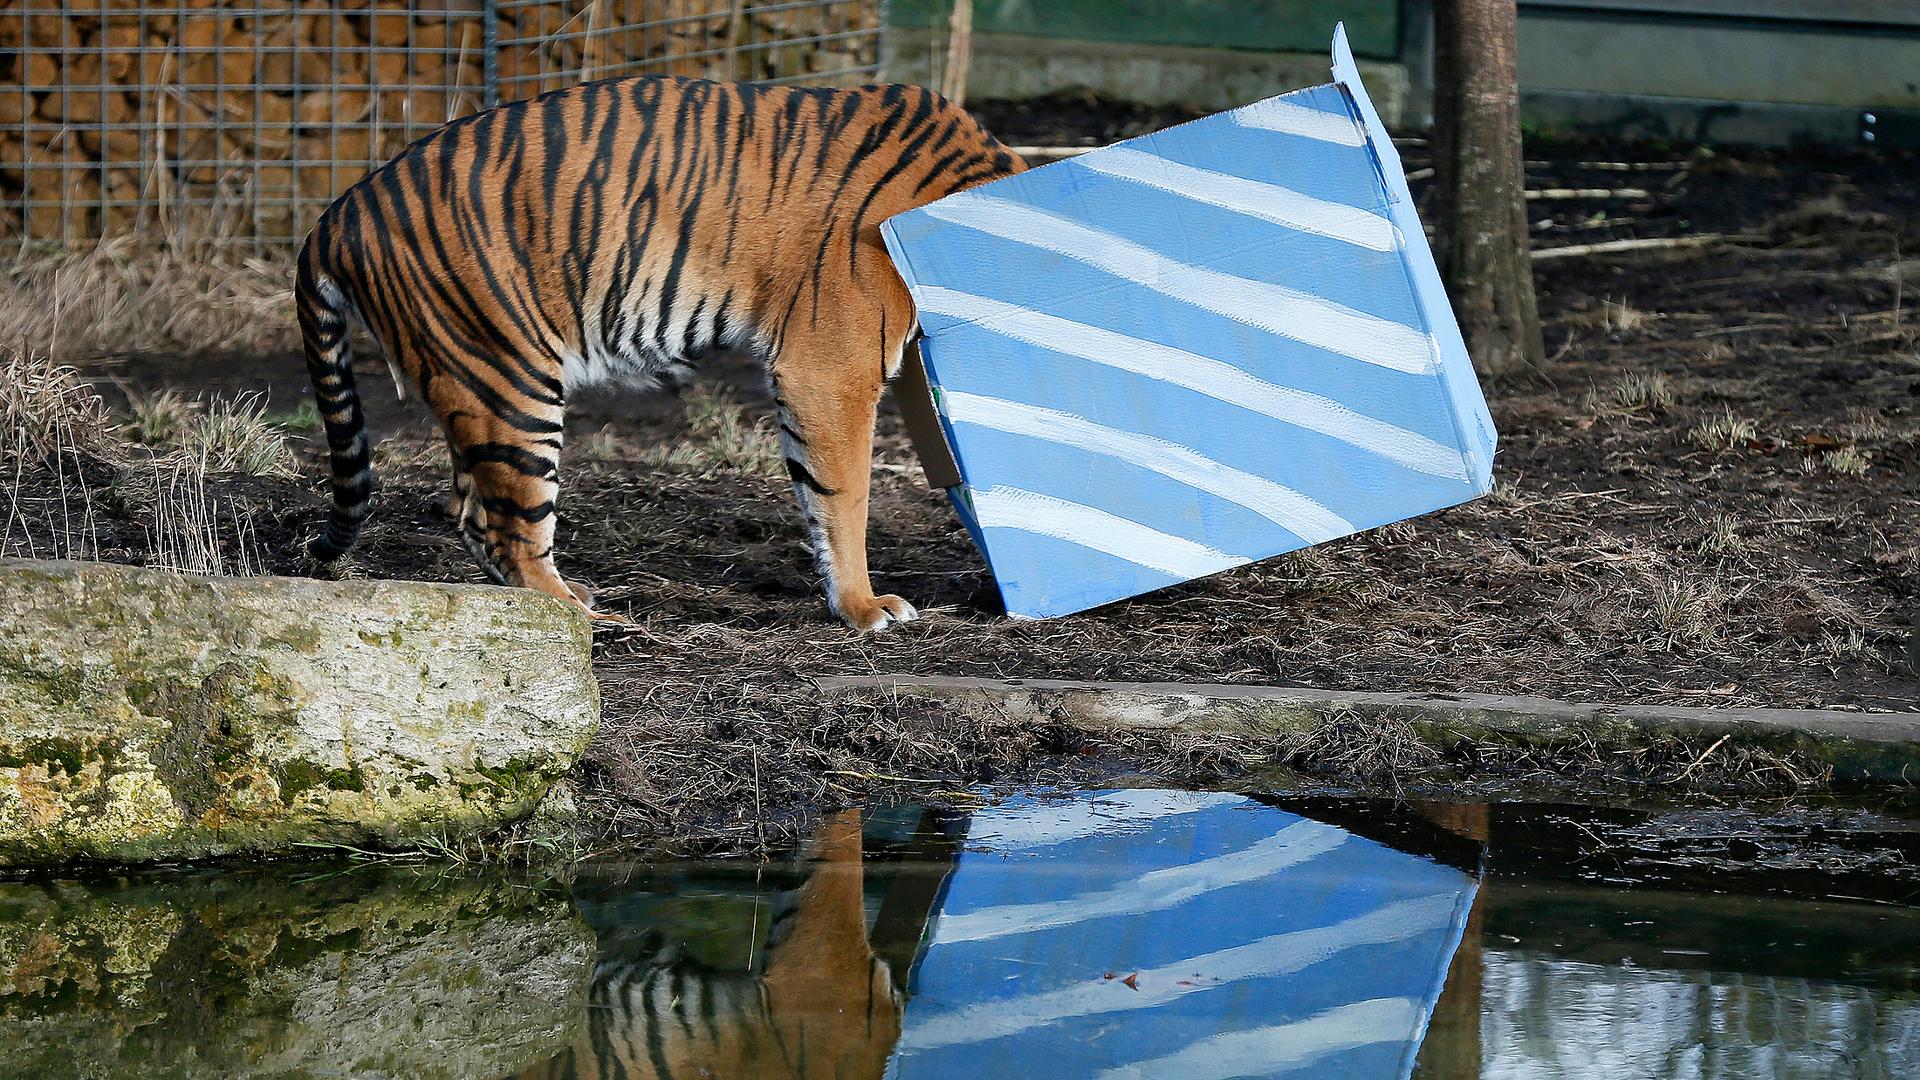 Sumatran tiger Melati looks inside a present box put out to celebrate the first birthday of her cub triplets in their enclosure at the London Zoo on February 4, 2015.